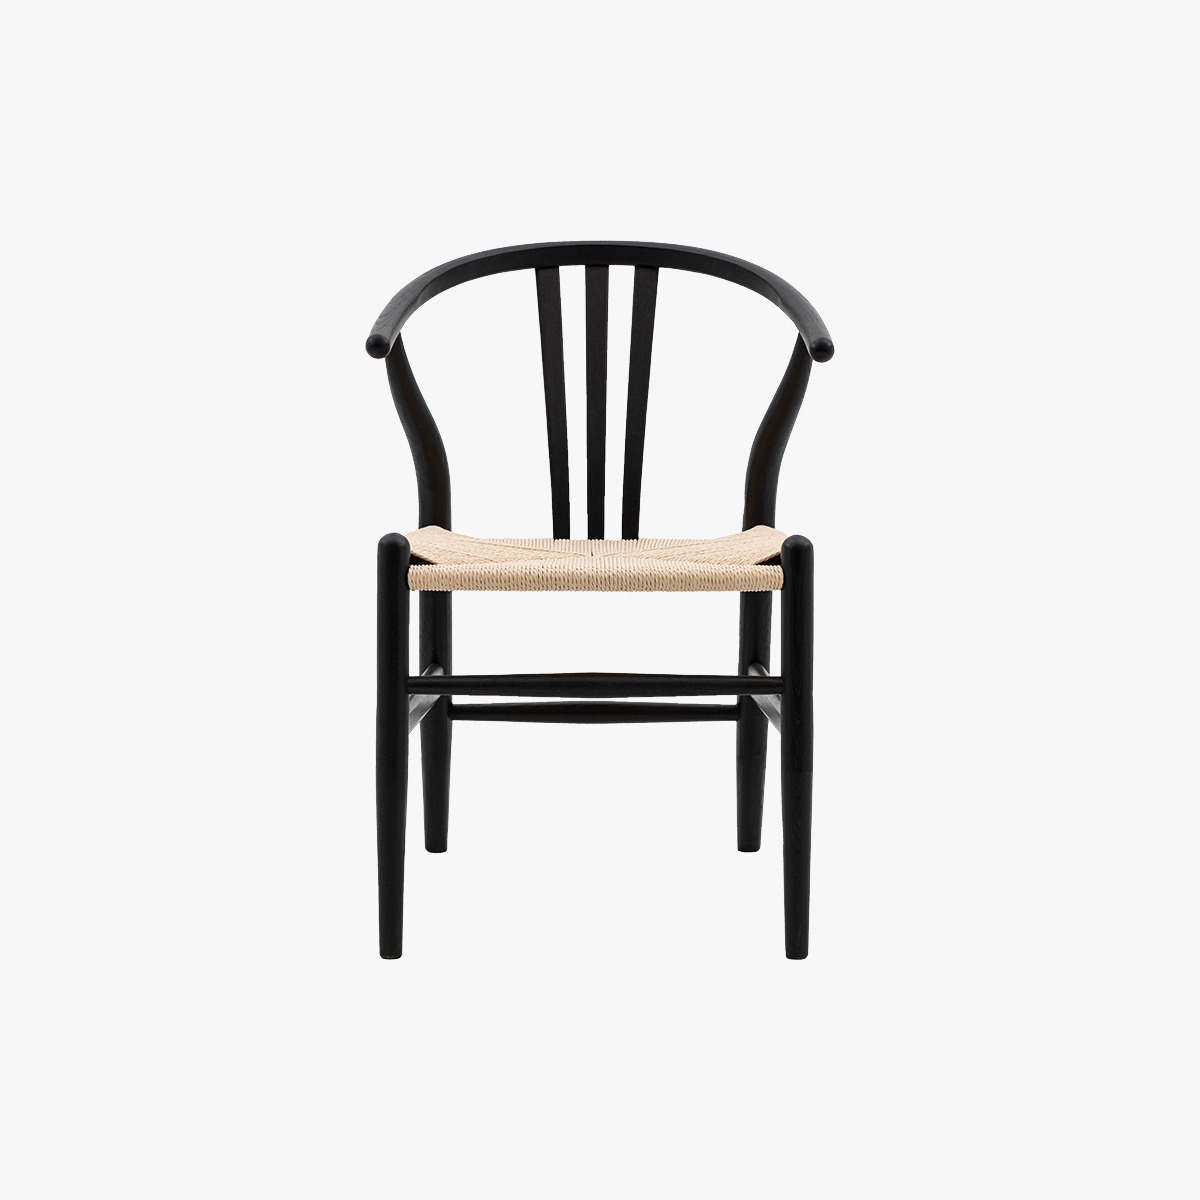 Maeve Chair in Black - Set of 2